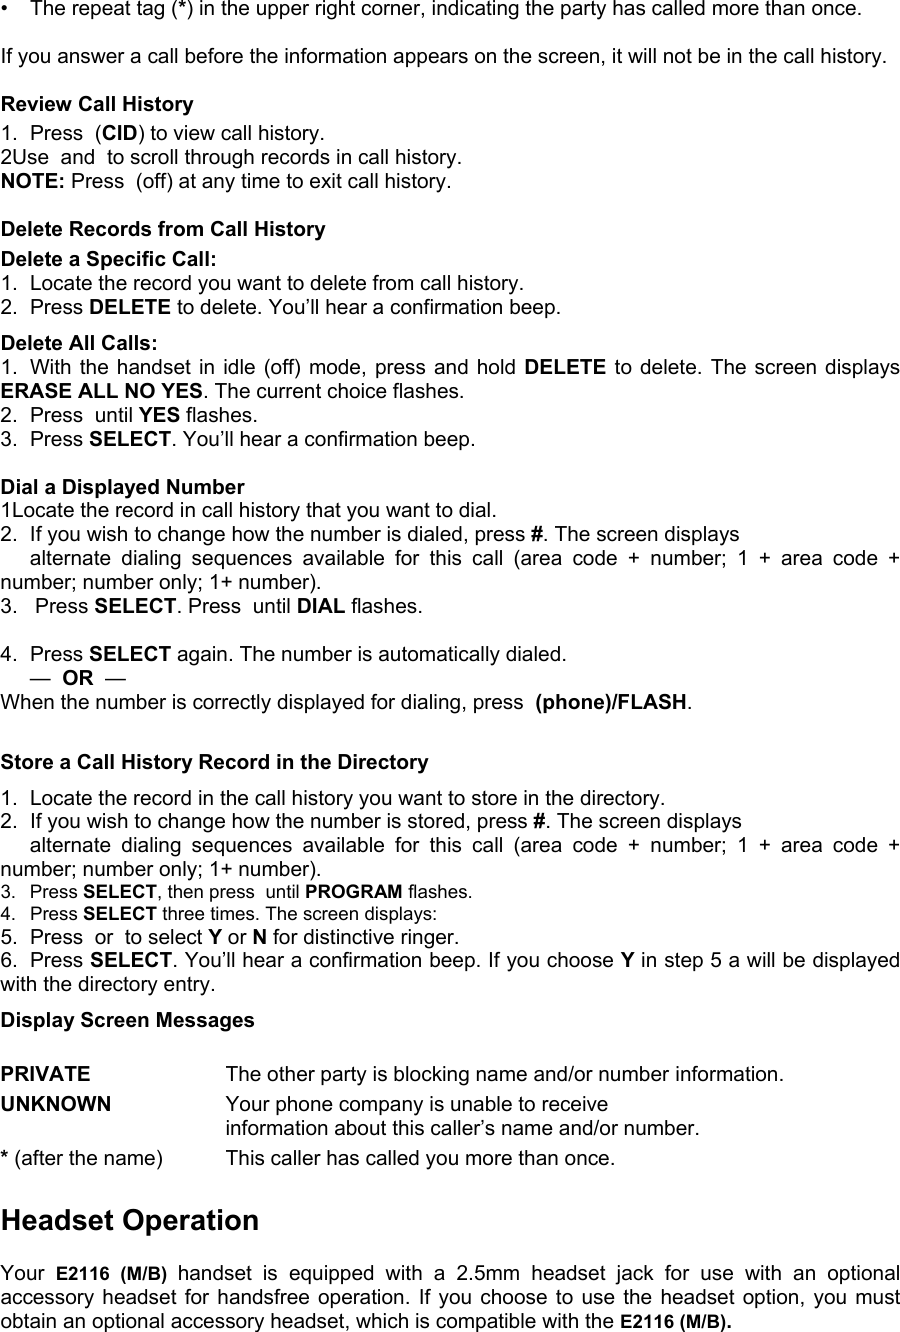 •  The repeat tag (*) in the upper right corner, indicating the party has called more than once.  If you answer a call before the information appears on the screen, it will not be in the call history.  Review Call History 1.  Press  (CID) to view call history.  2Use  and  to scroll through records in call history. NOTE: Press  (off) at any time to exit call history.  Delete Records from Call History Delete a Specific Call: 1.  Locate the record you want to delete from call history. 2. Press DELETE to delete. You’ll hear a confirmation beep. Delete All Calls: 1.  With the handset in idle (off) mode, press and hold DELETE to delete. The screen displays ERASE ALL NO YES. The current choice flashes. 2.  Press  until YES flashes. 3. Press SELECT. You’ll hear a confirmation beep.  Dial a Displayed Number 1Locate the record in call history that you want to dial. 2. If you wish to change how the number is dialed, press #. The screen displays     alternate dialing sequences available for this call (area code + number; 1 + area code + number; number only; 1+ number). 3.   Press SELECT. Press  until DIAL flashes.  4. Press SELECT again. The number is automatically dialed.  —  OR  —   When the number is correctly displayed for dialing, press  (phone)/FLASH.  Store a Call History Record in the Directory 1.  Locate the record in the call history you want to store in the directory. 2.  If you wish to change how the number is stored, press #. The screen displays    alternate dialing sequences available for this call (area code + number; 1 + area code + number; number only; 1+ number). 3. Press SELECT, then press  until PROGRAM flashes. 4. Press SELECT three times. The screen displays: 5.  Press  or  to select Y or N for distinctive ringer. 6. Press SELECT. You’ll hear a confirmation beep. If you choose Y in step 5 a will be displayed with the directory entry. Display Screen Messages  PRIVATE     The other party is blocking name and/or number  information. UNKNOWN     Your phone company is unable to receive     information about this caller’s name and/or number. * (after the name)    This caller has called you more than once.  Headset Operation  Your  E2116 (M/B) handset is equipped with a 2.5mm headset jack for use with an optional accessory headset for handsfree operation. If you choose to use the headset option, you must obtain an optional accessory headset, which is compatible with the E2116 (M/B). 